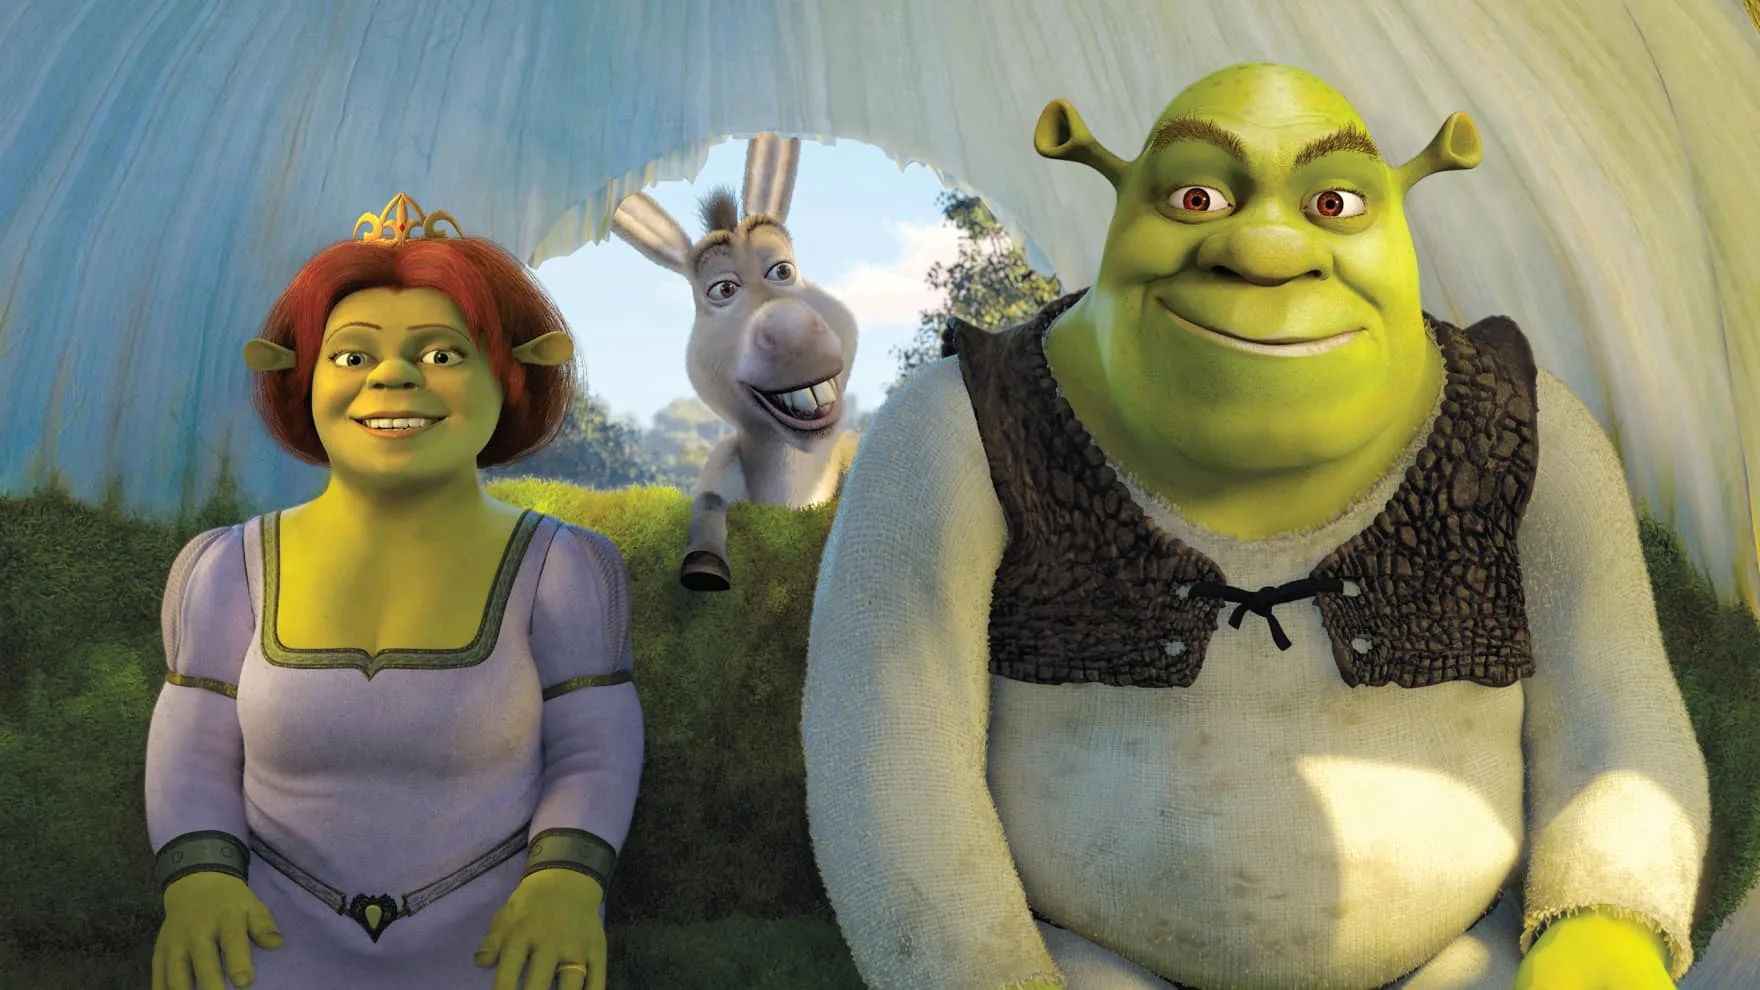 Shrek and Fiona sit in their onion carriage with Donkey in the background